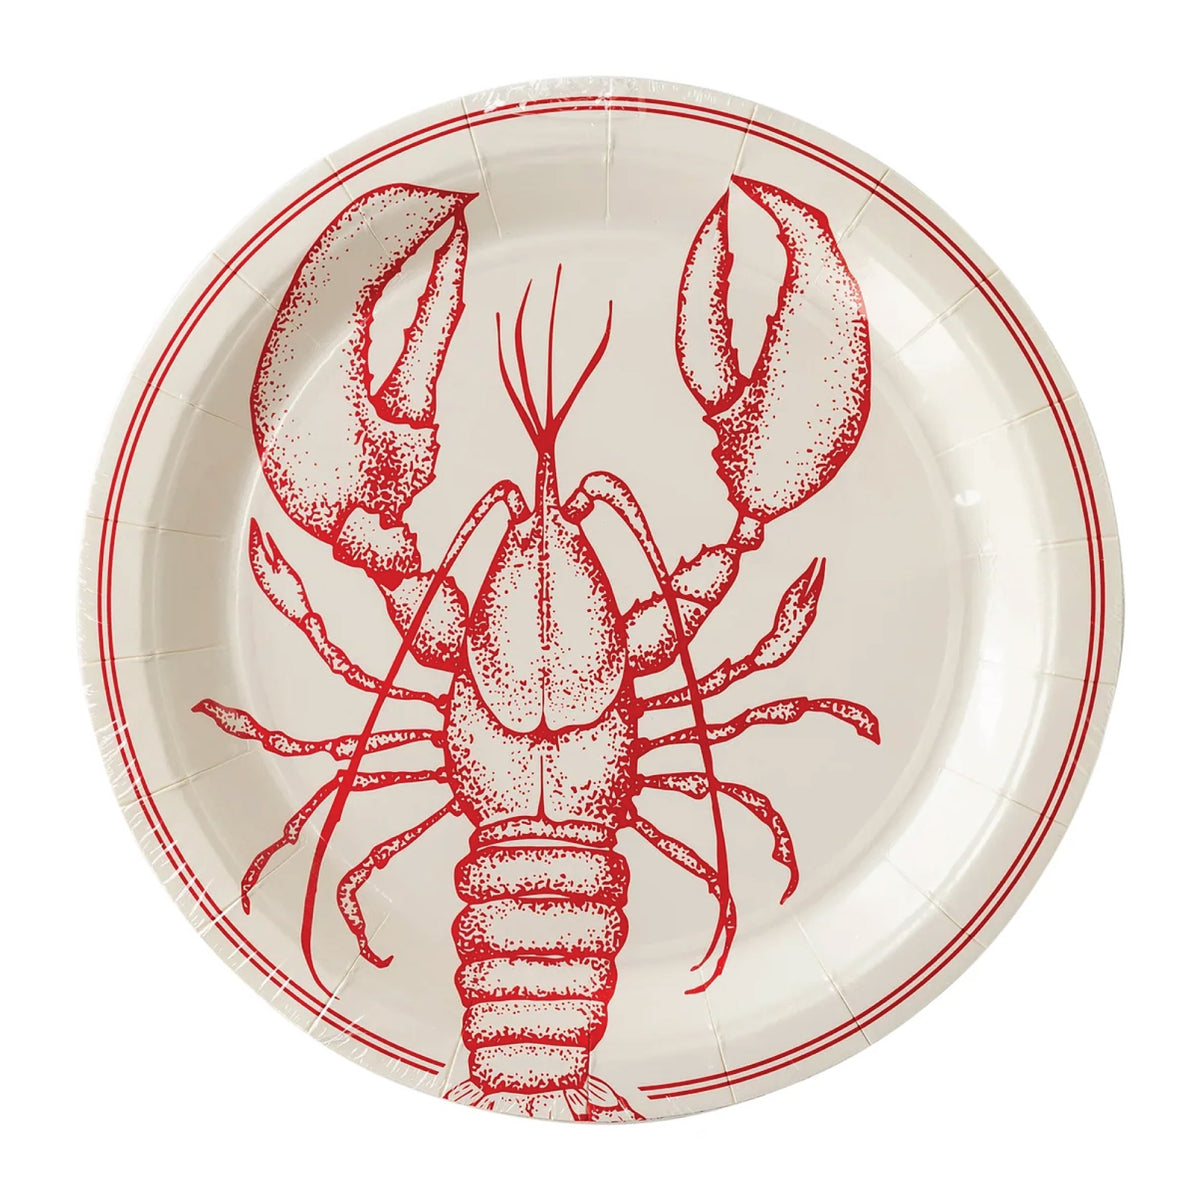 APOWBLS Crawfish Boil Plates And Napkins Party Supplies - Lobster Boil  Party Tableware, Plate, Napkin, Tablecloth, Fork, Crayfish Seafood Shrimp  Boil